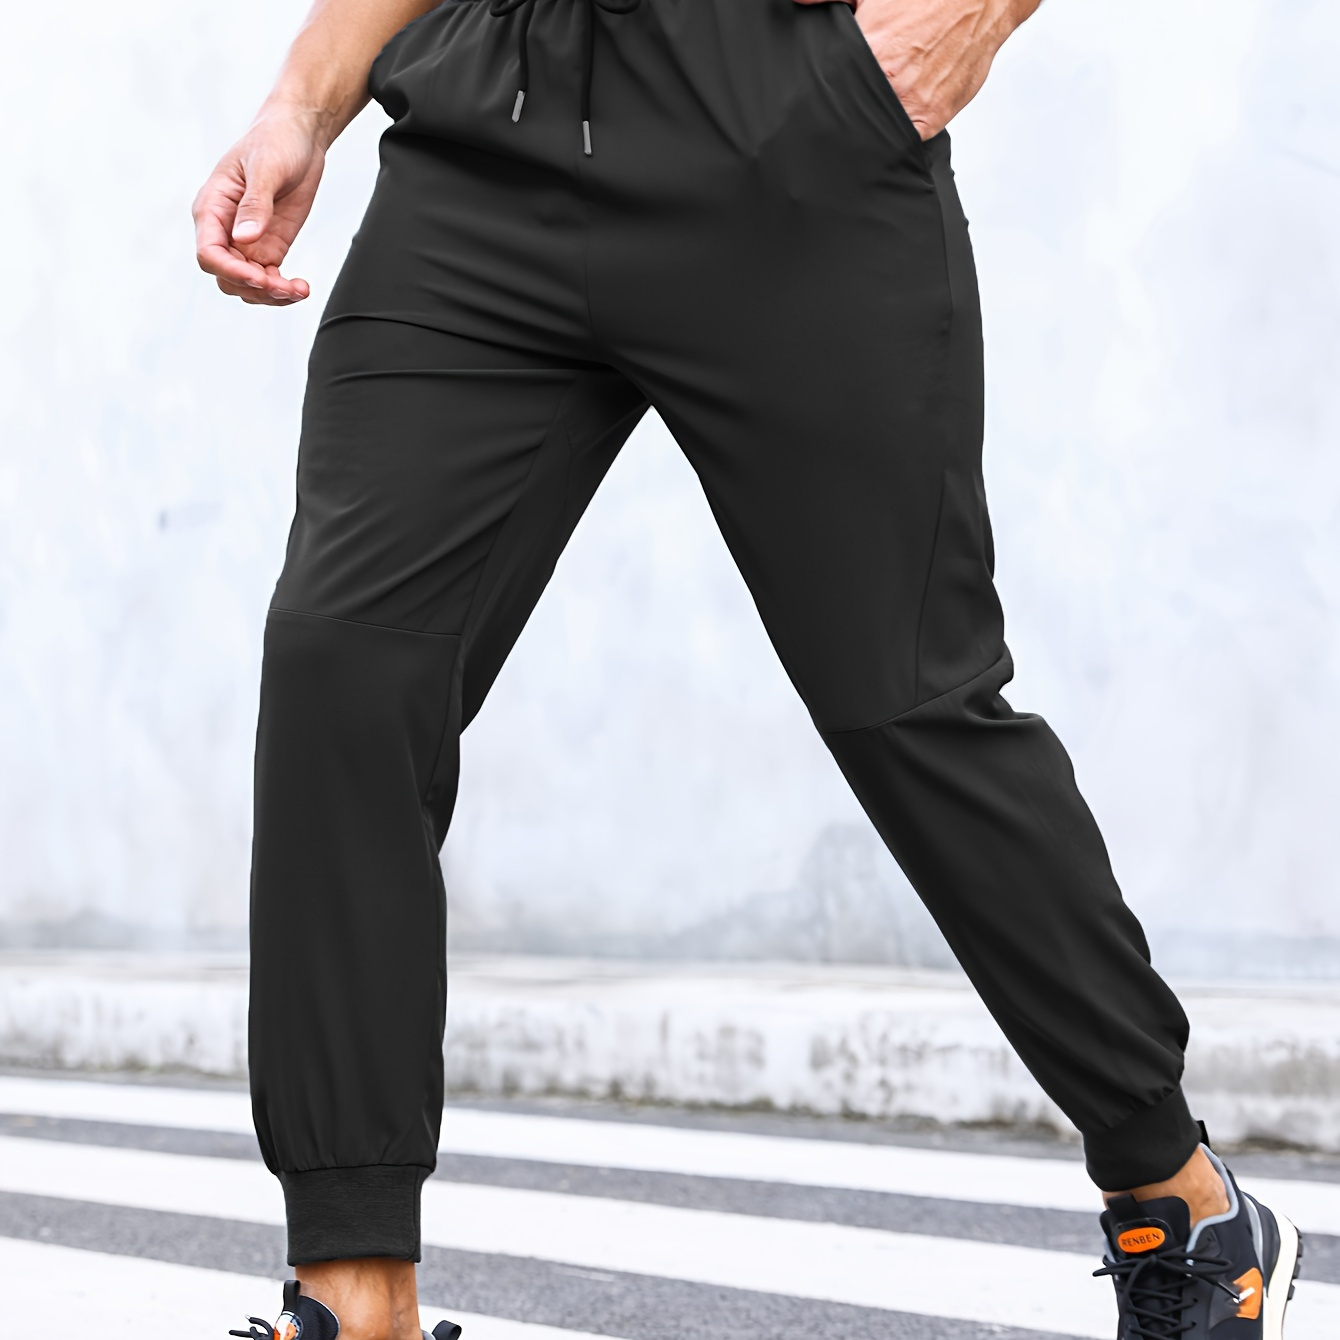 

Solid Thin Men's Sports Drawstring Long Sweatpants With Pockets For Running Jogging Hiking, Spring Fall